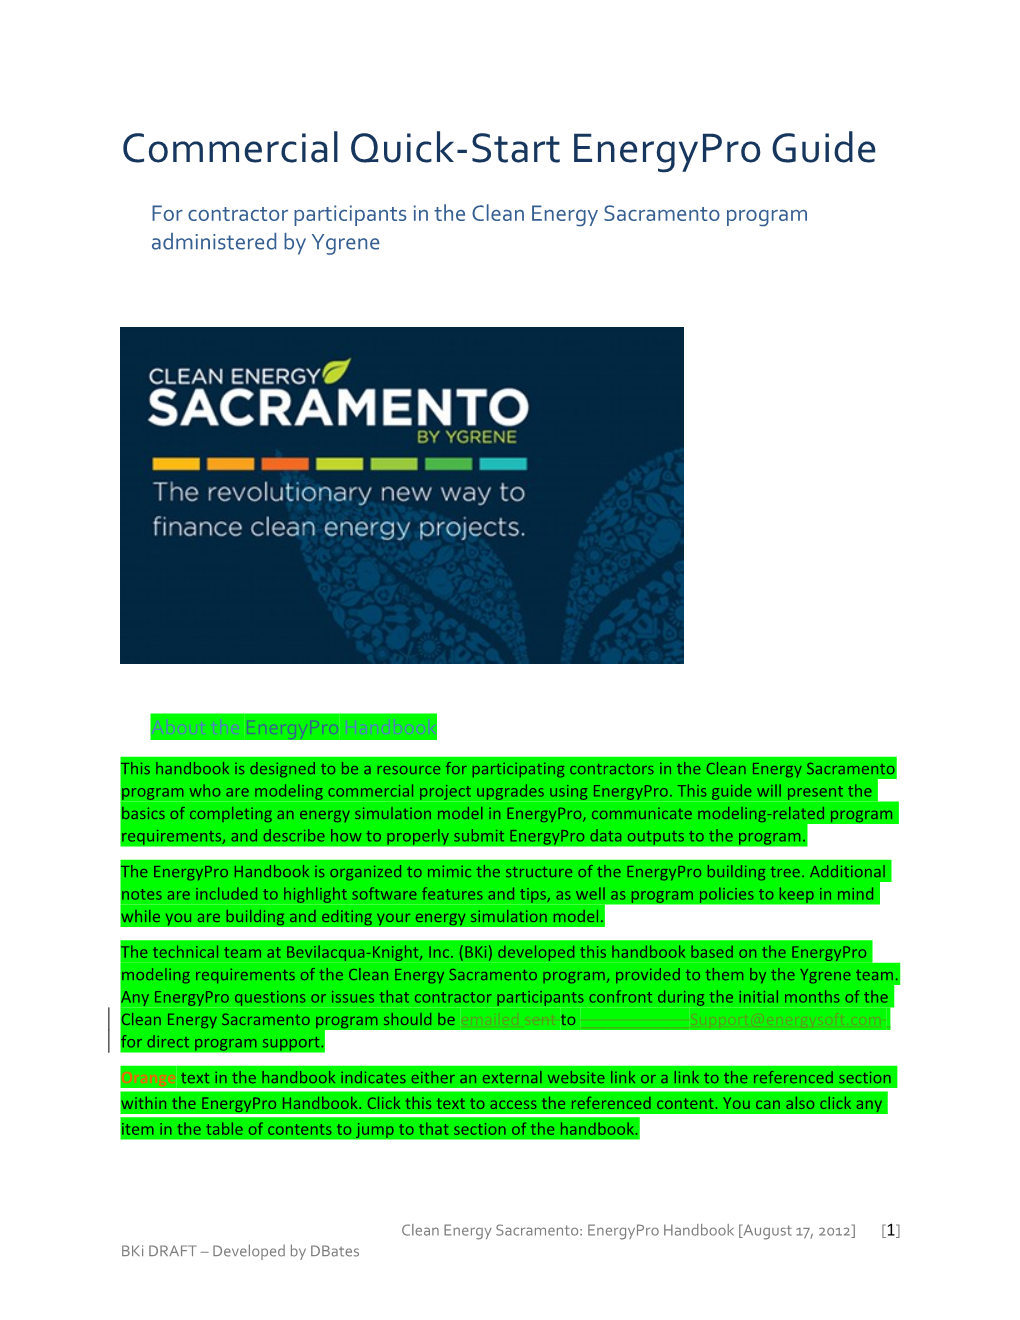 For Contractor Participants in the Clean Energy Sacramento Program Administered by Ygrene